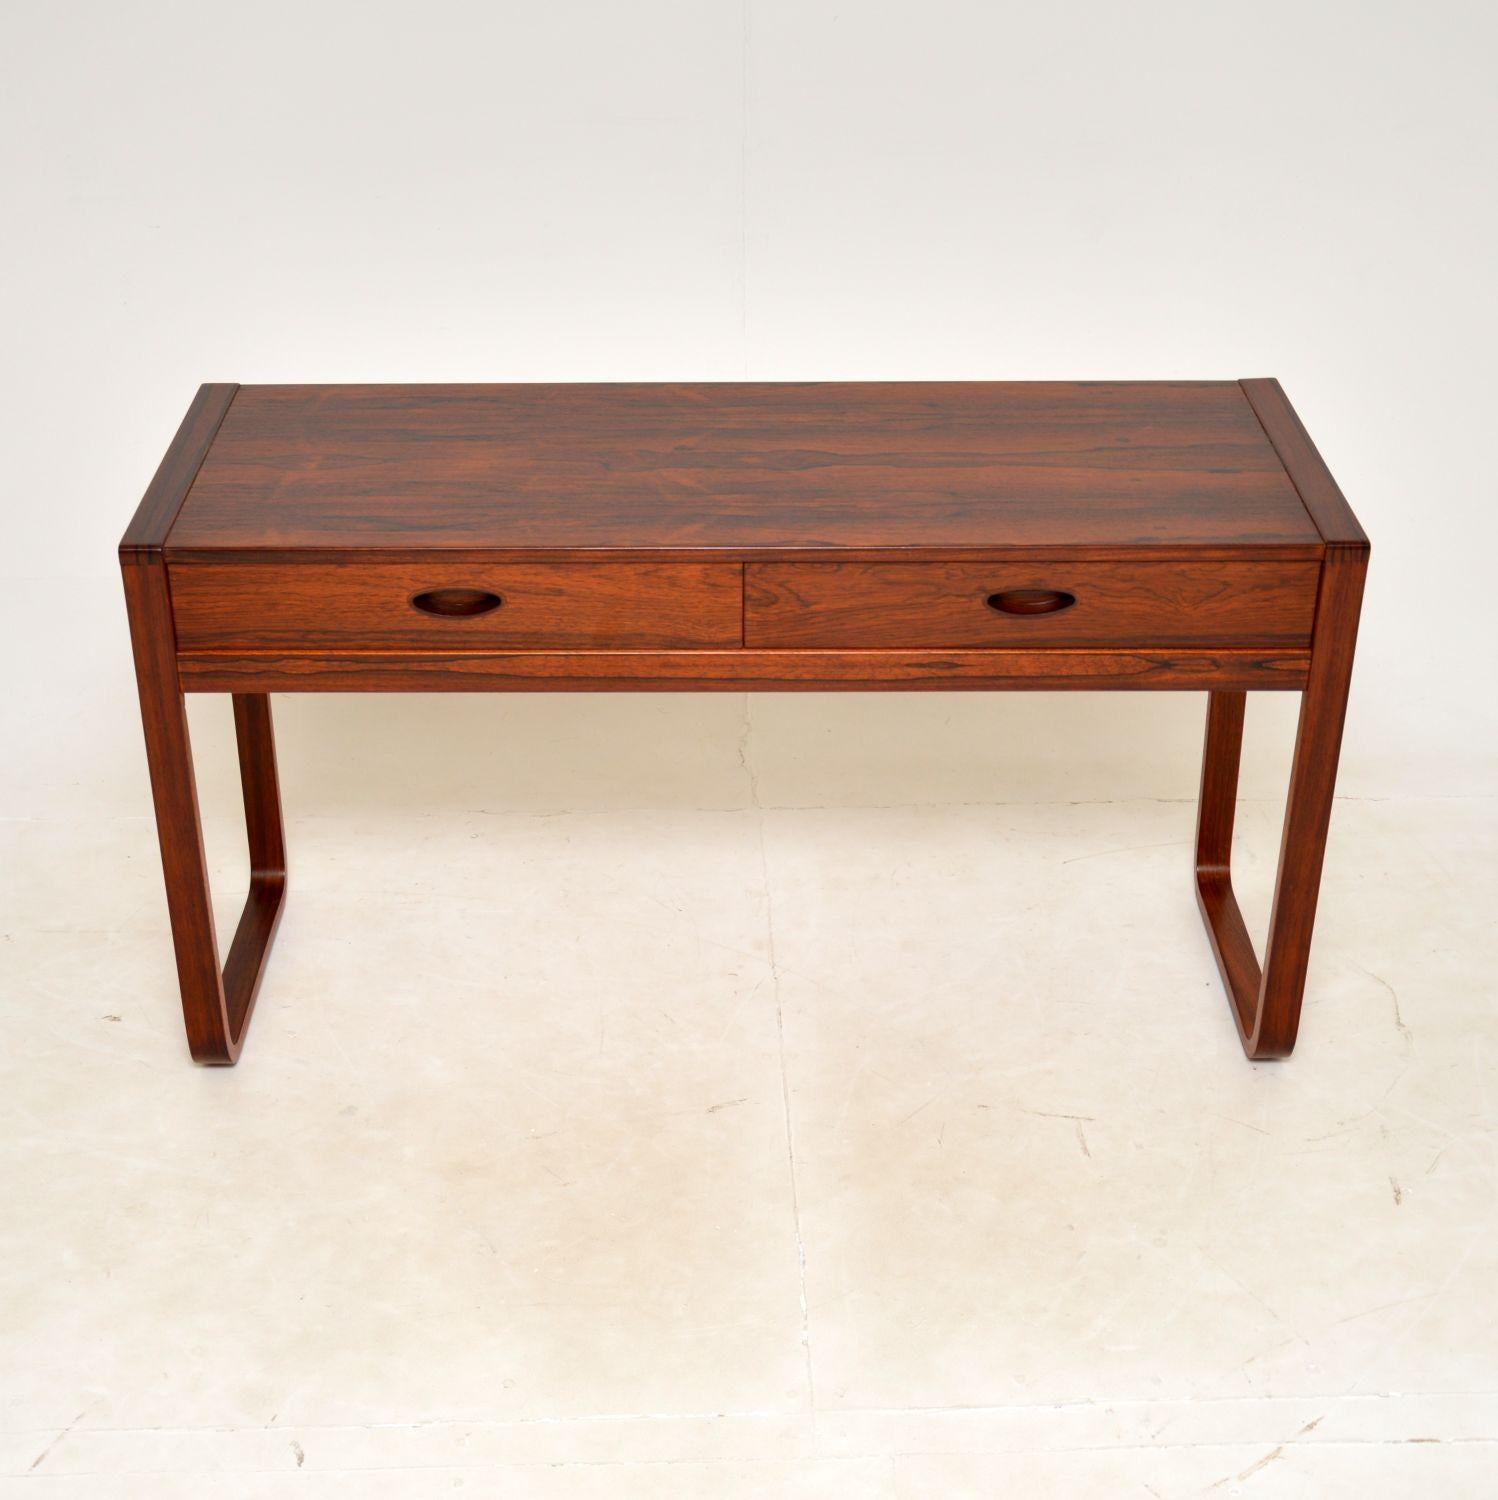 A stylish and very rare vintage desk / console table. This was designed by Gunther Hoffstead for Uniflex, it was made in England and dates from the 1960s.

It is of superb quality with a gorgeous design. There are two drawers with beautiful